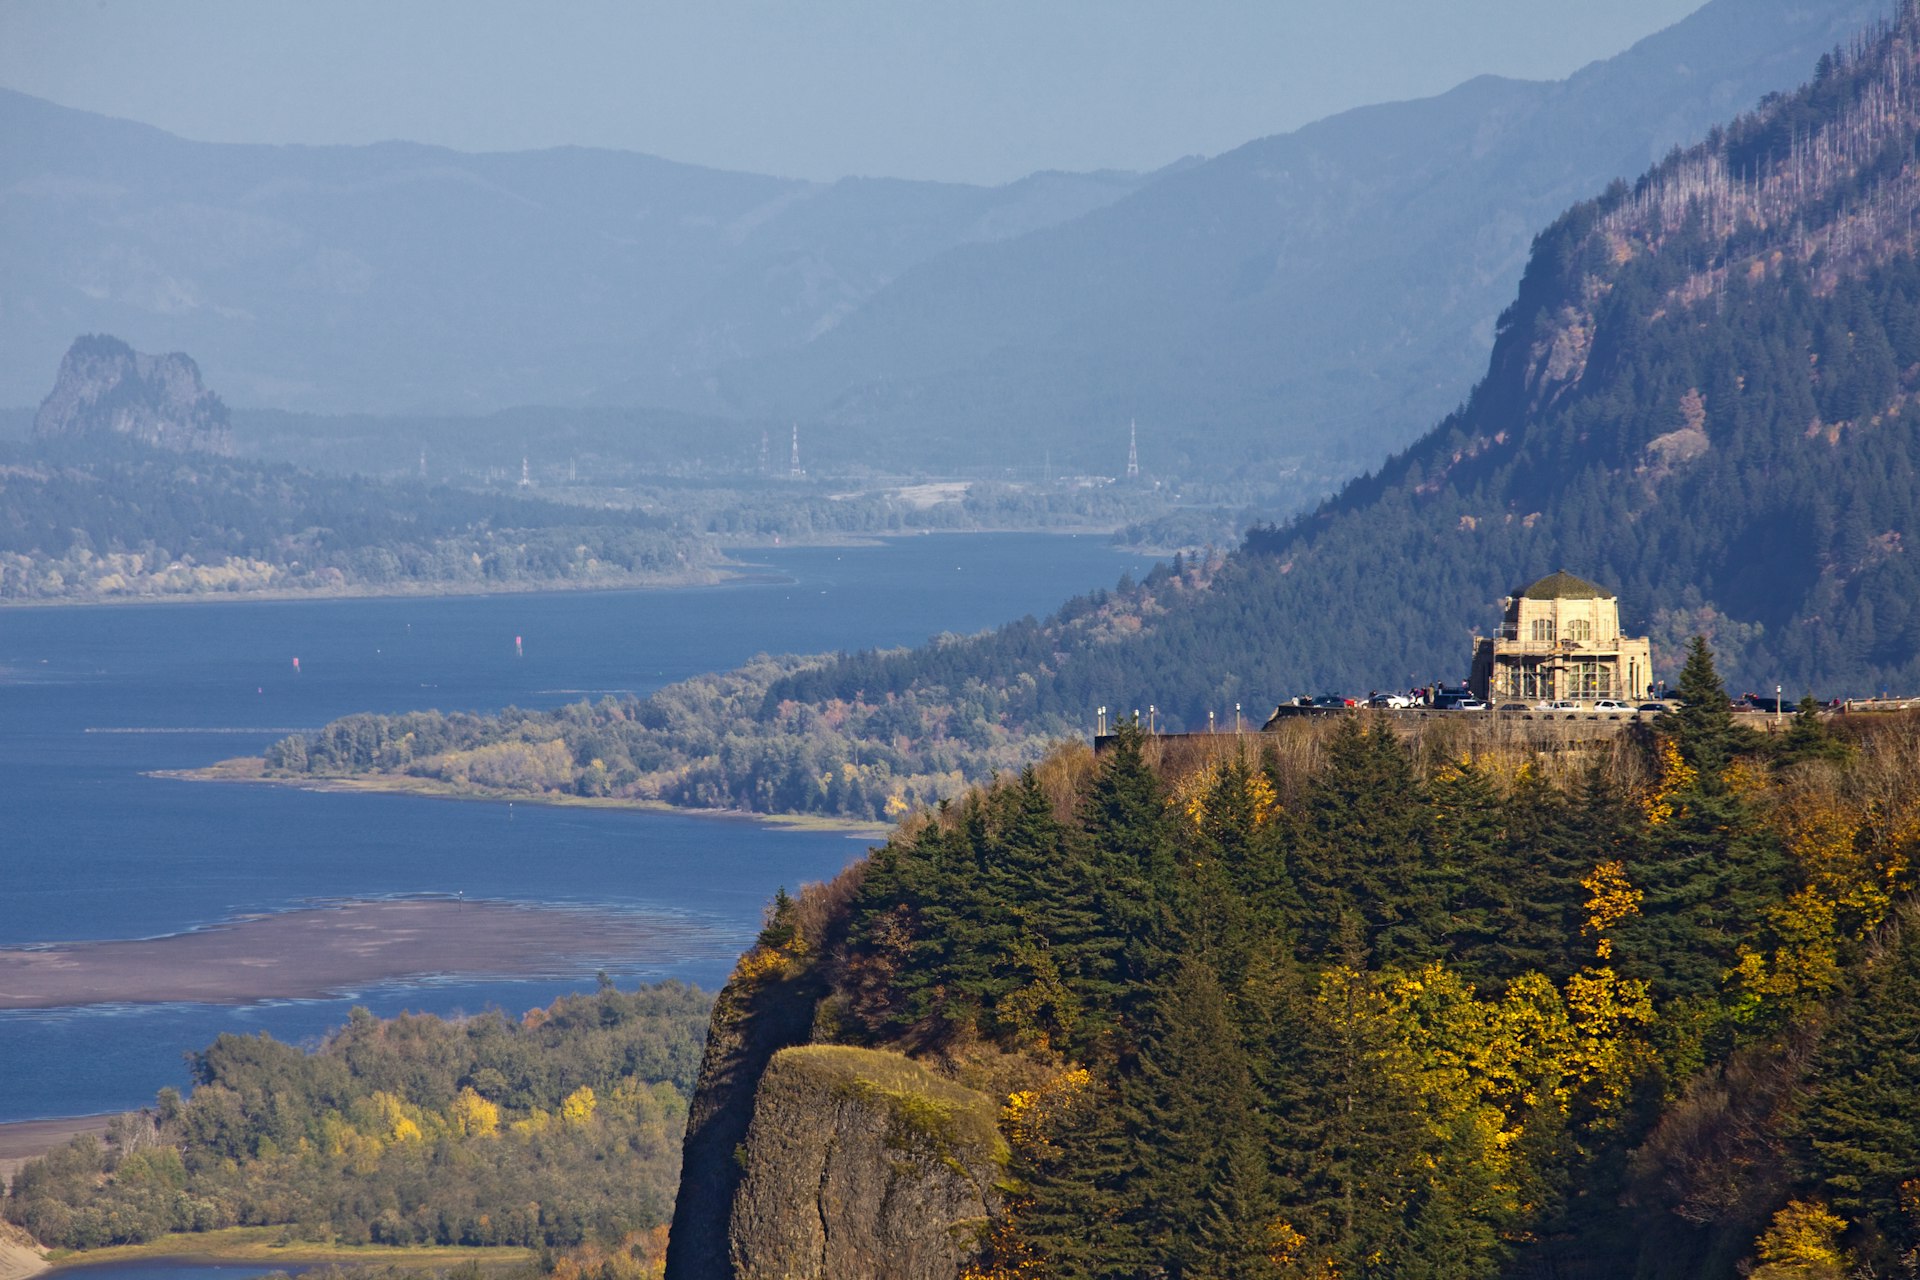 An aerial view of Crown Point Vista House with cliffs overlooking the Columbia River, Multnomah County, Oregon, USA